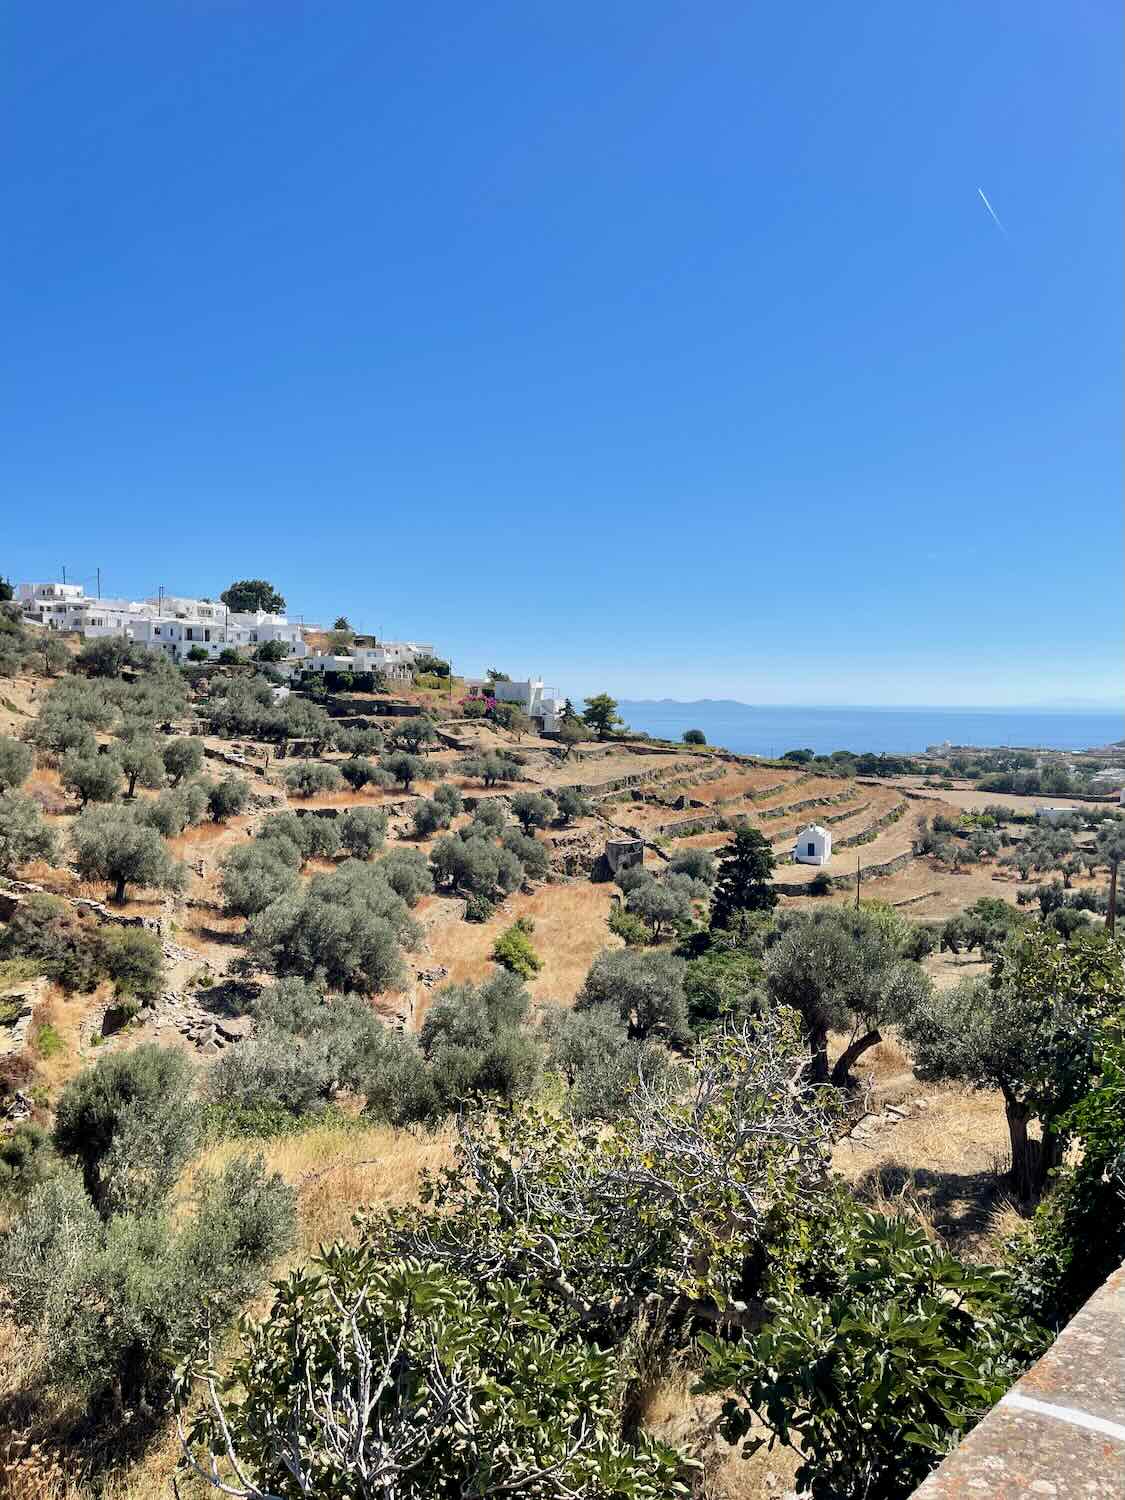 A panoramic view of the rolling hills dotted with olive trees and the whitewashed architecture of Sifnos, under a clear blue sky.